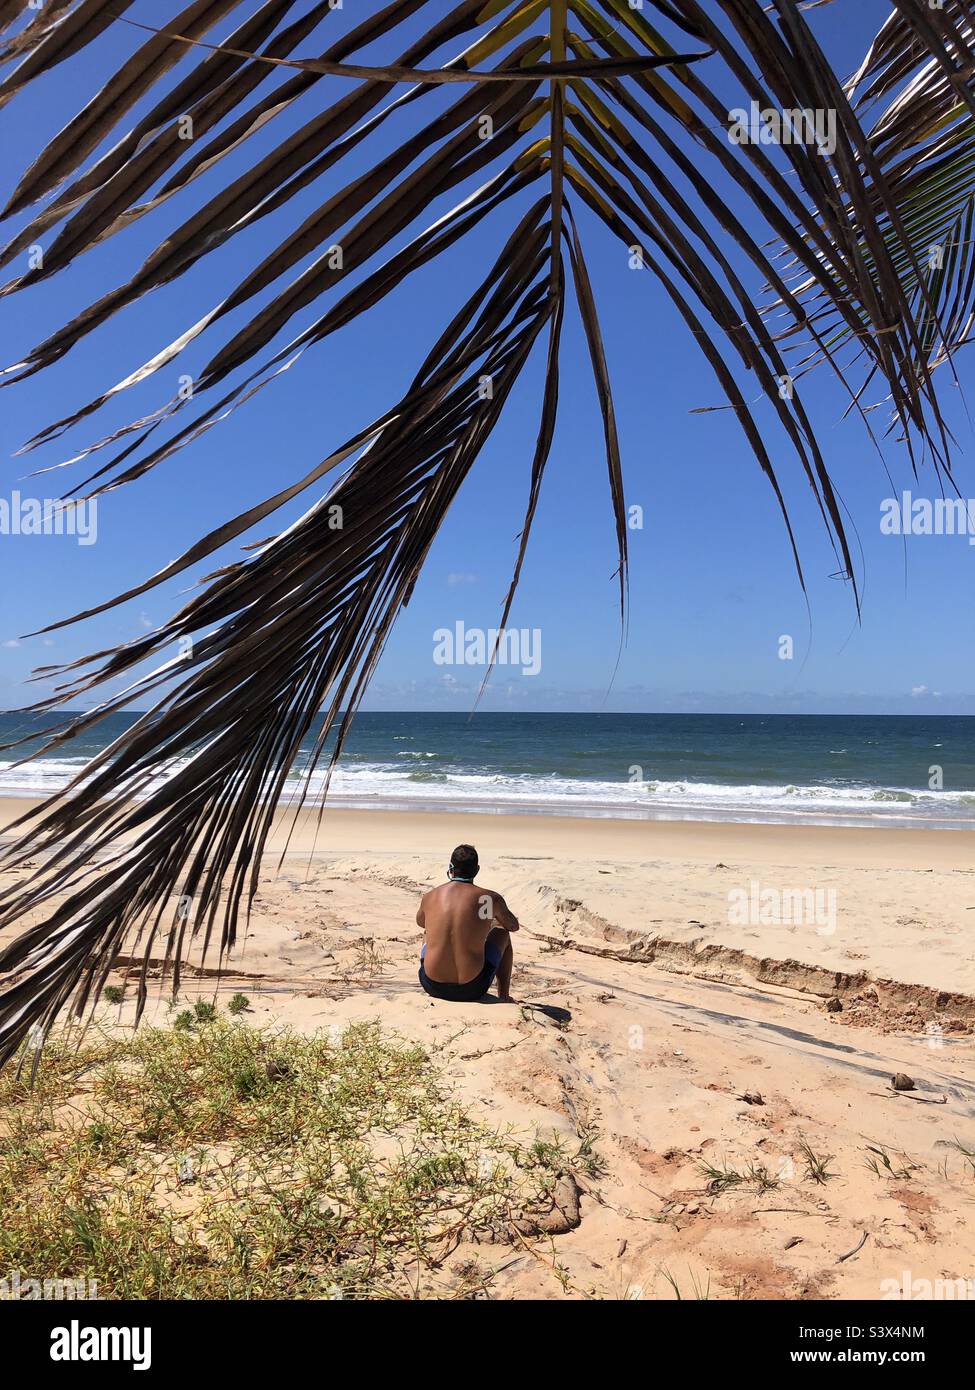 A man sitting on the beach in solitude. Stock Photo